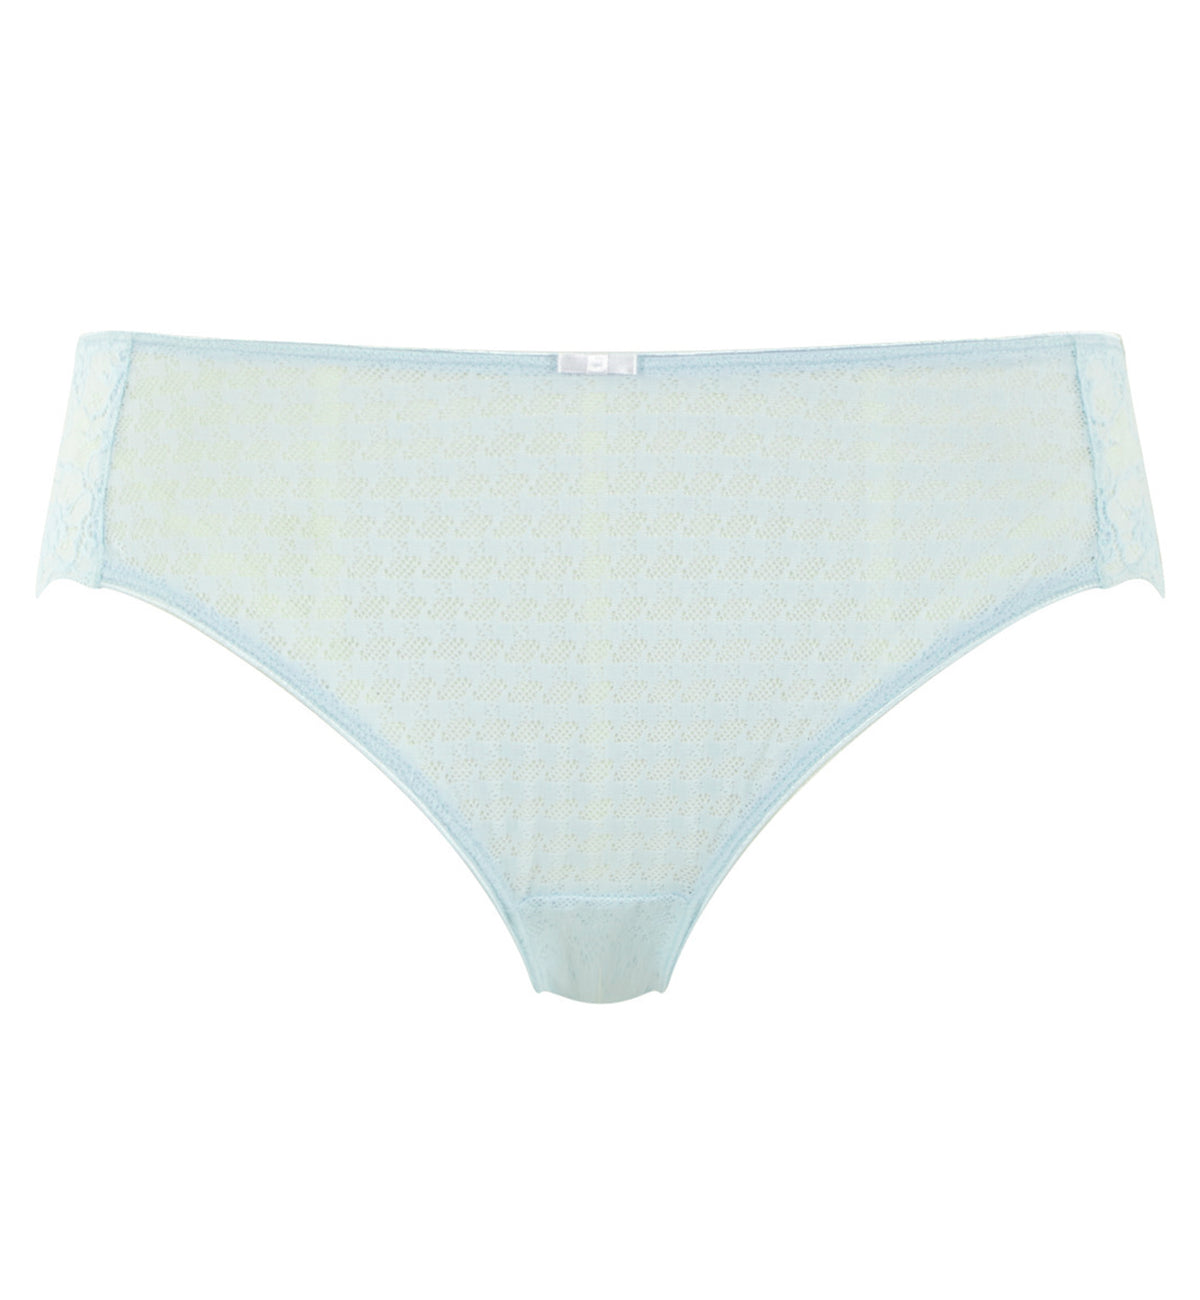 Panache Envy Matching Brief (7282),Small,Ice Blue - Ice Blue,Small